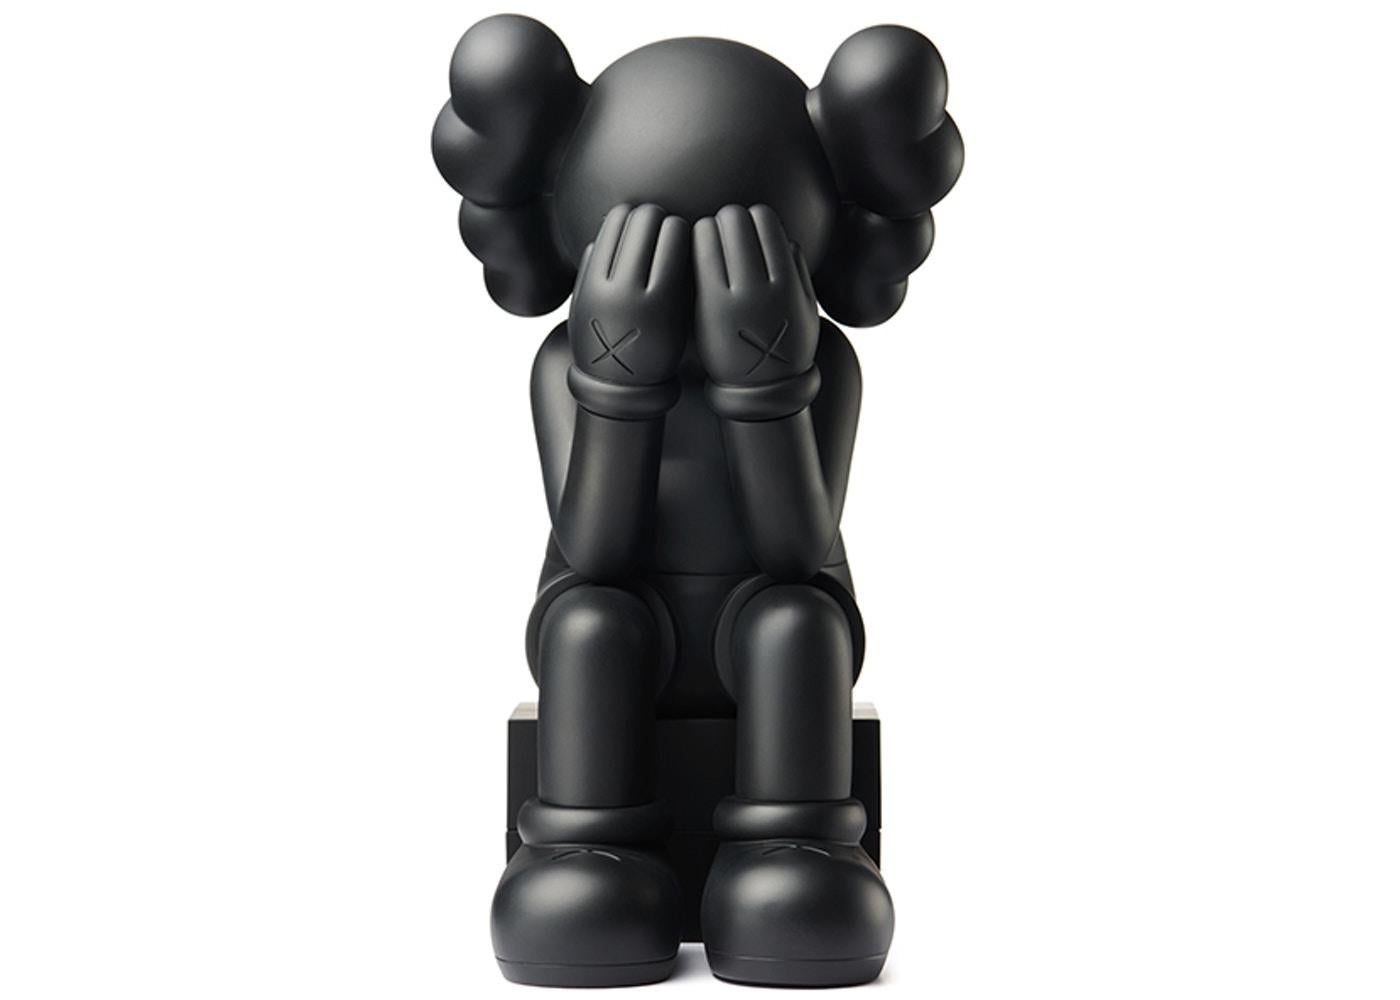 Passing Through (Black)
Date of creation: 2018
Medium: Sculpture
Media: Vinyl
Edition: Unknown and sold out
Size: 20 x 8.6 x 13 cm.
Observations:Vinyl sculpture published in 2018 by KAWS/ORIGINALFAKE & Medicom Toys. Sent inside its original box.